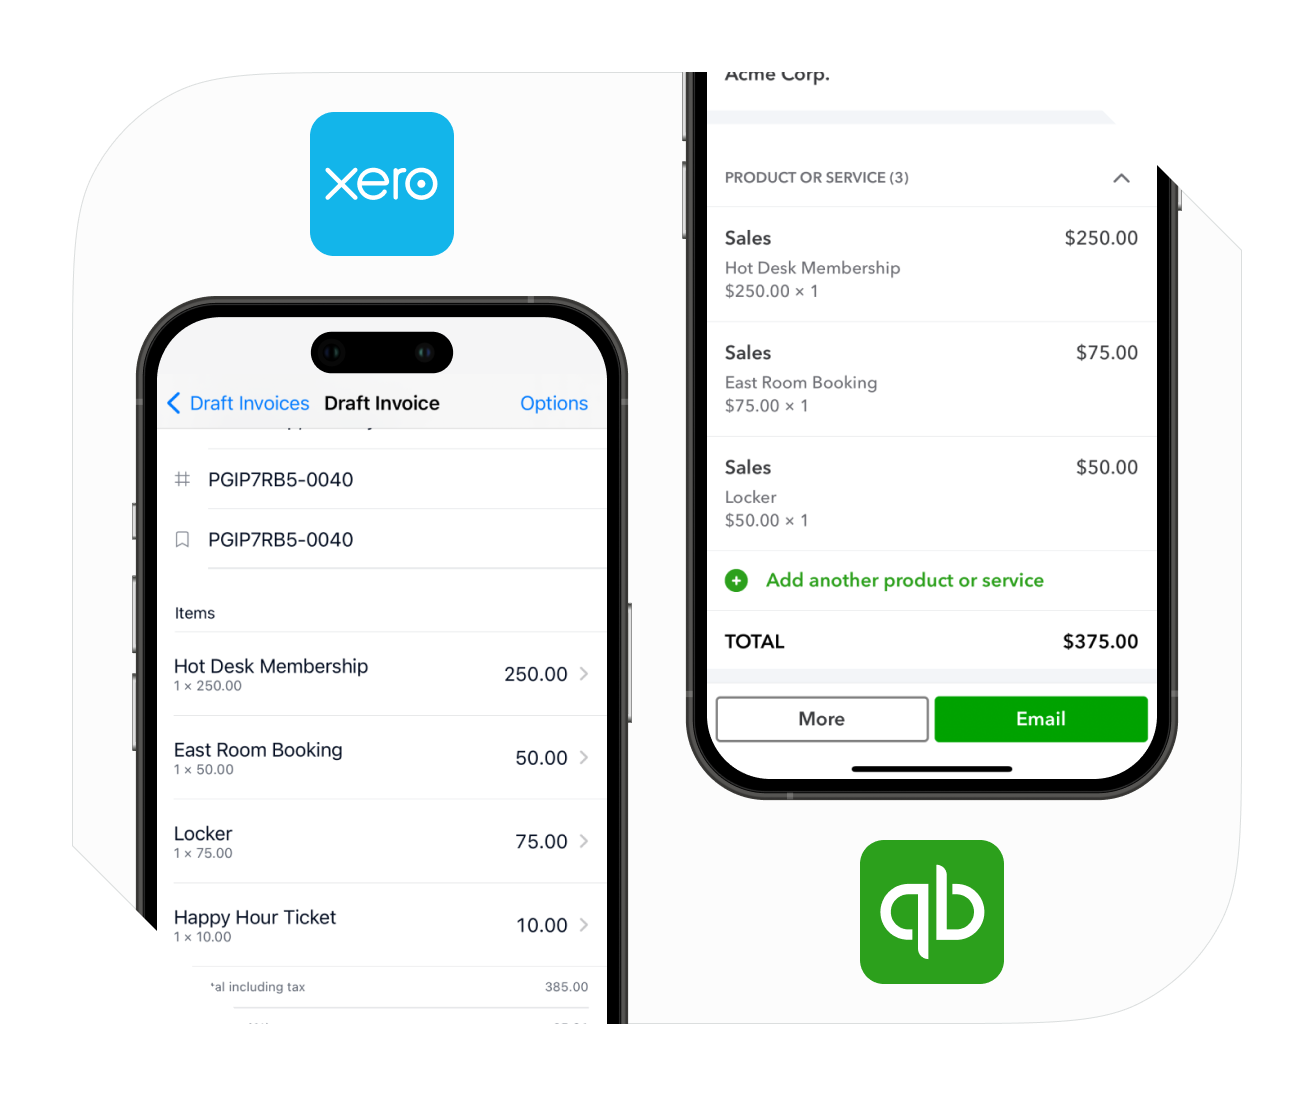 Spacebring coworking space management software seamlessly integrates with Xero and Quickbooks